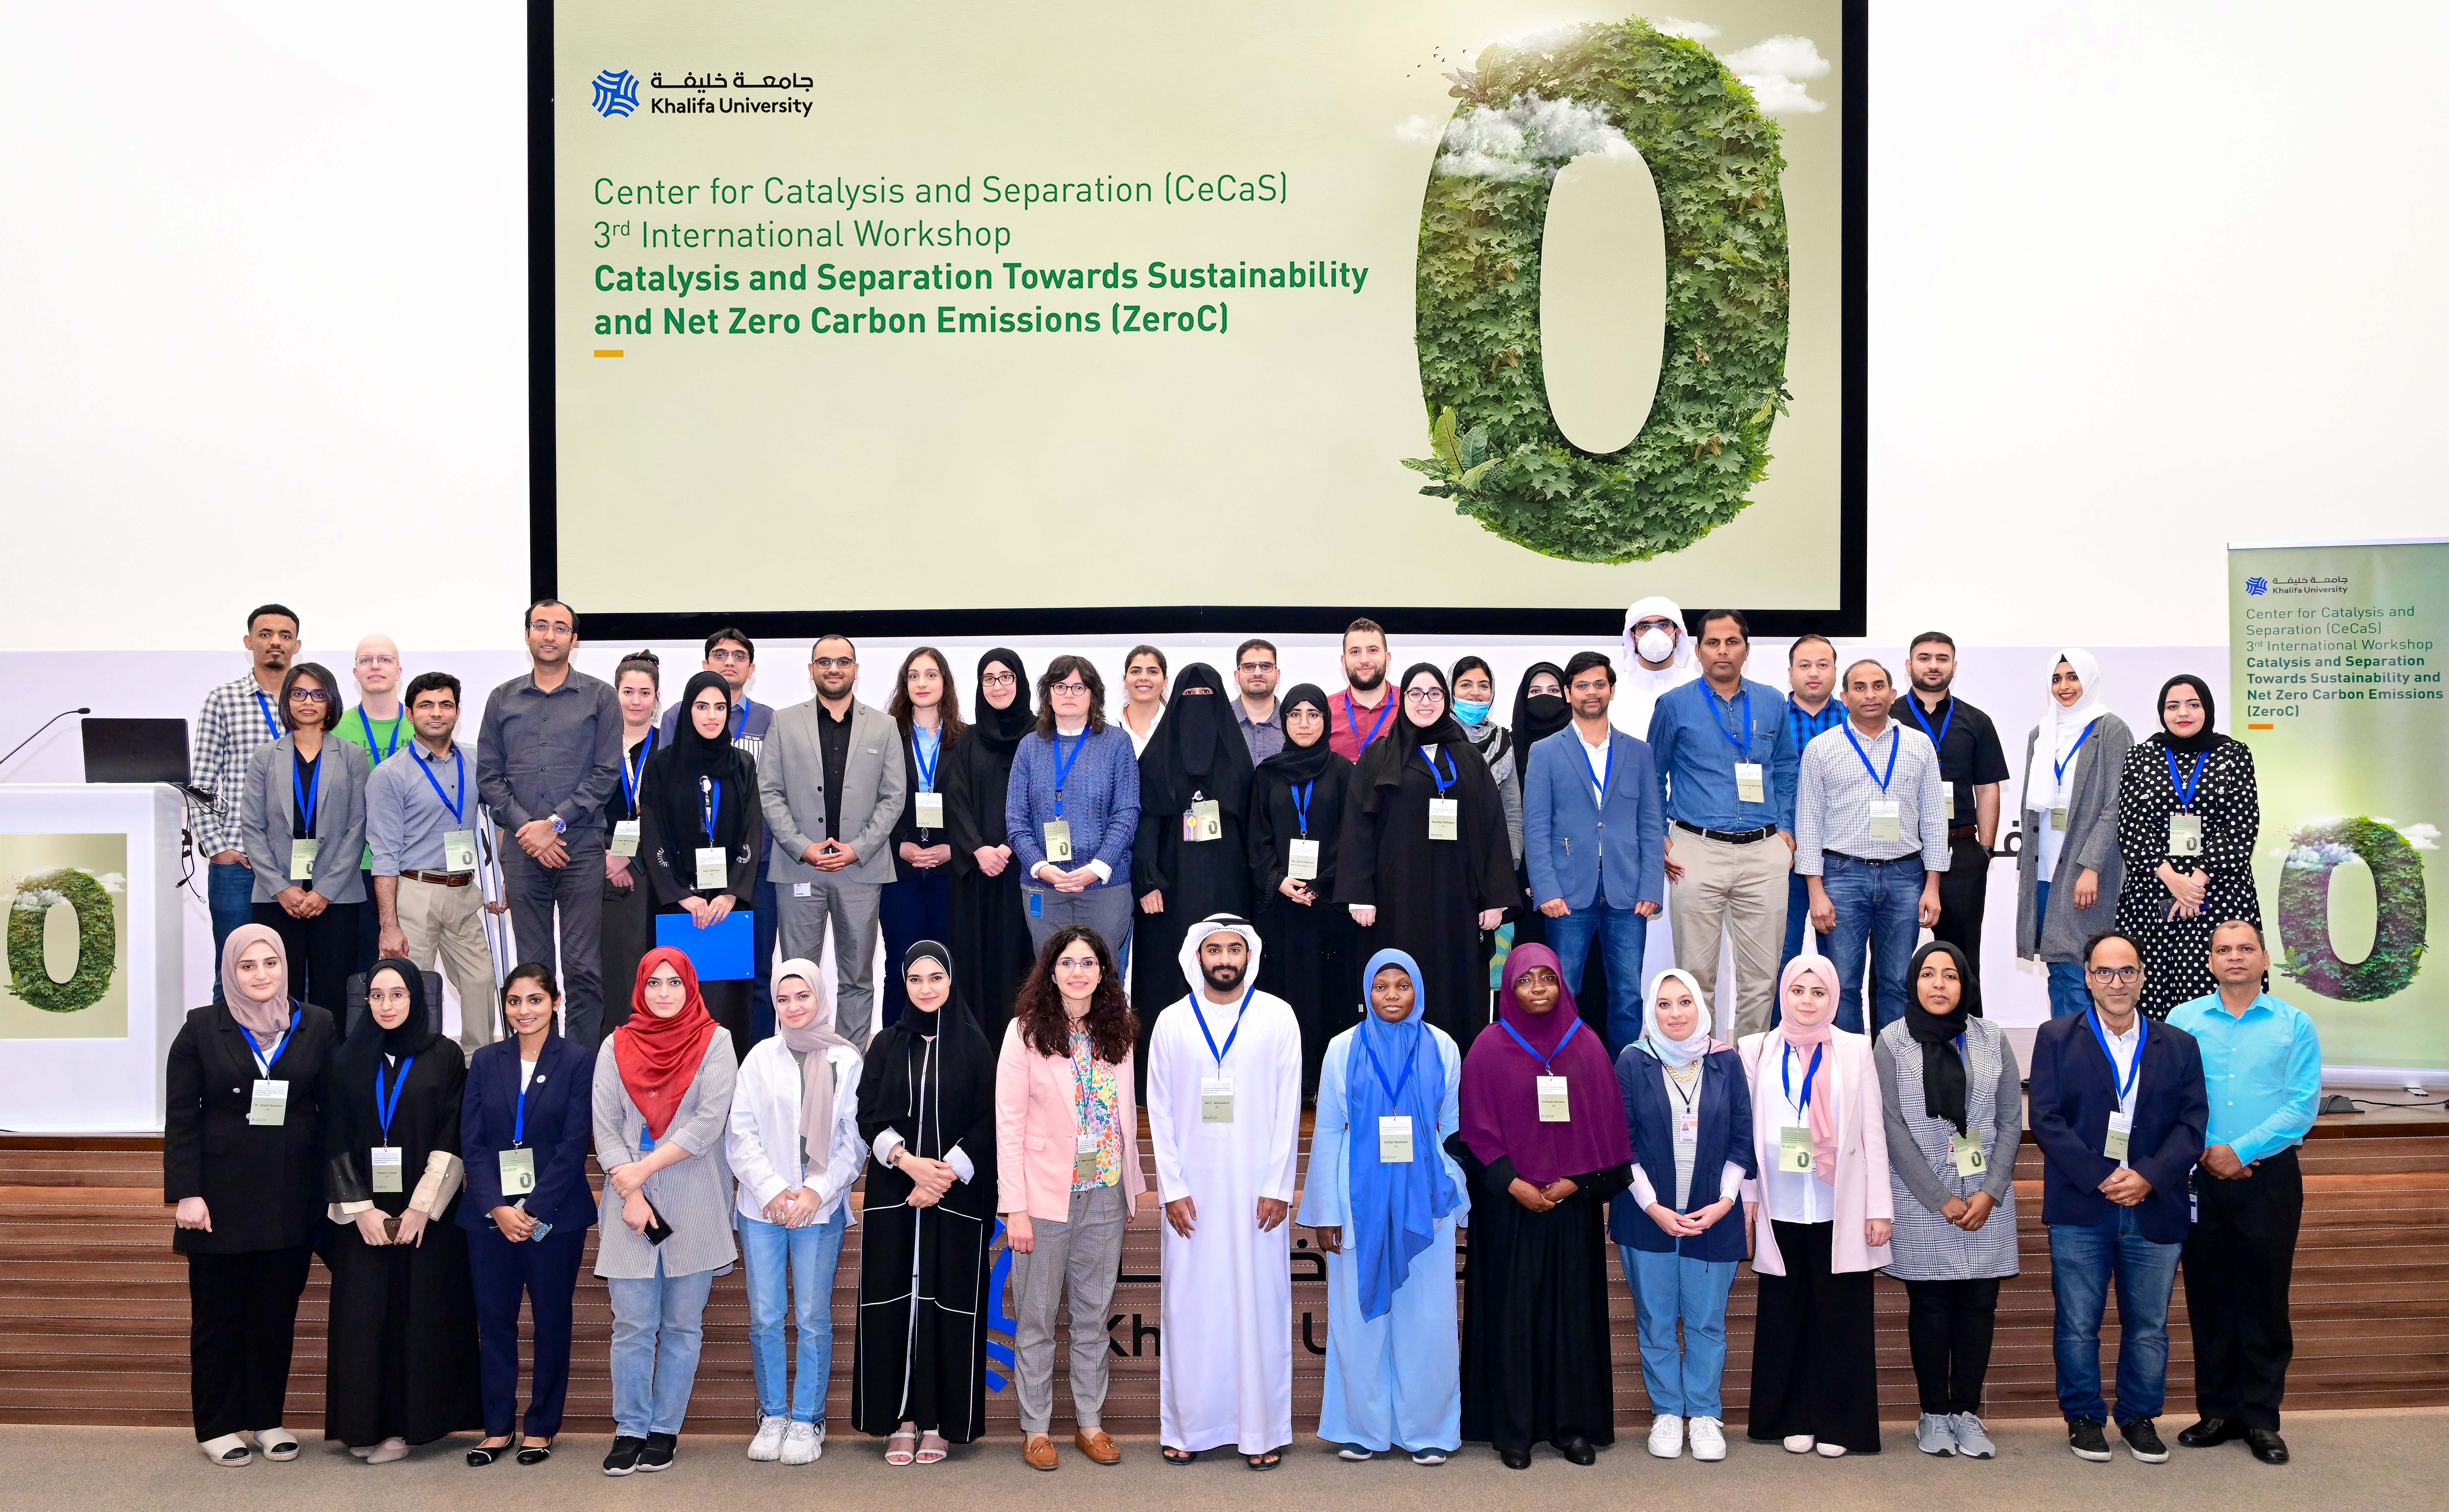 Center for Catalysis and Separation (CeCaS)